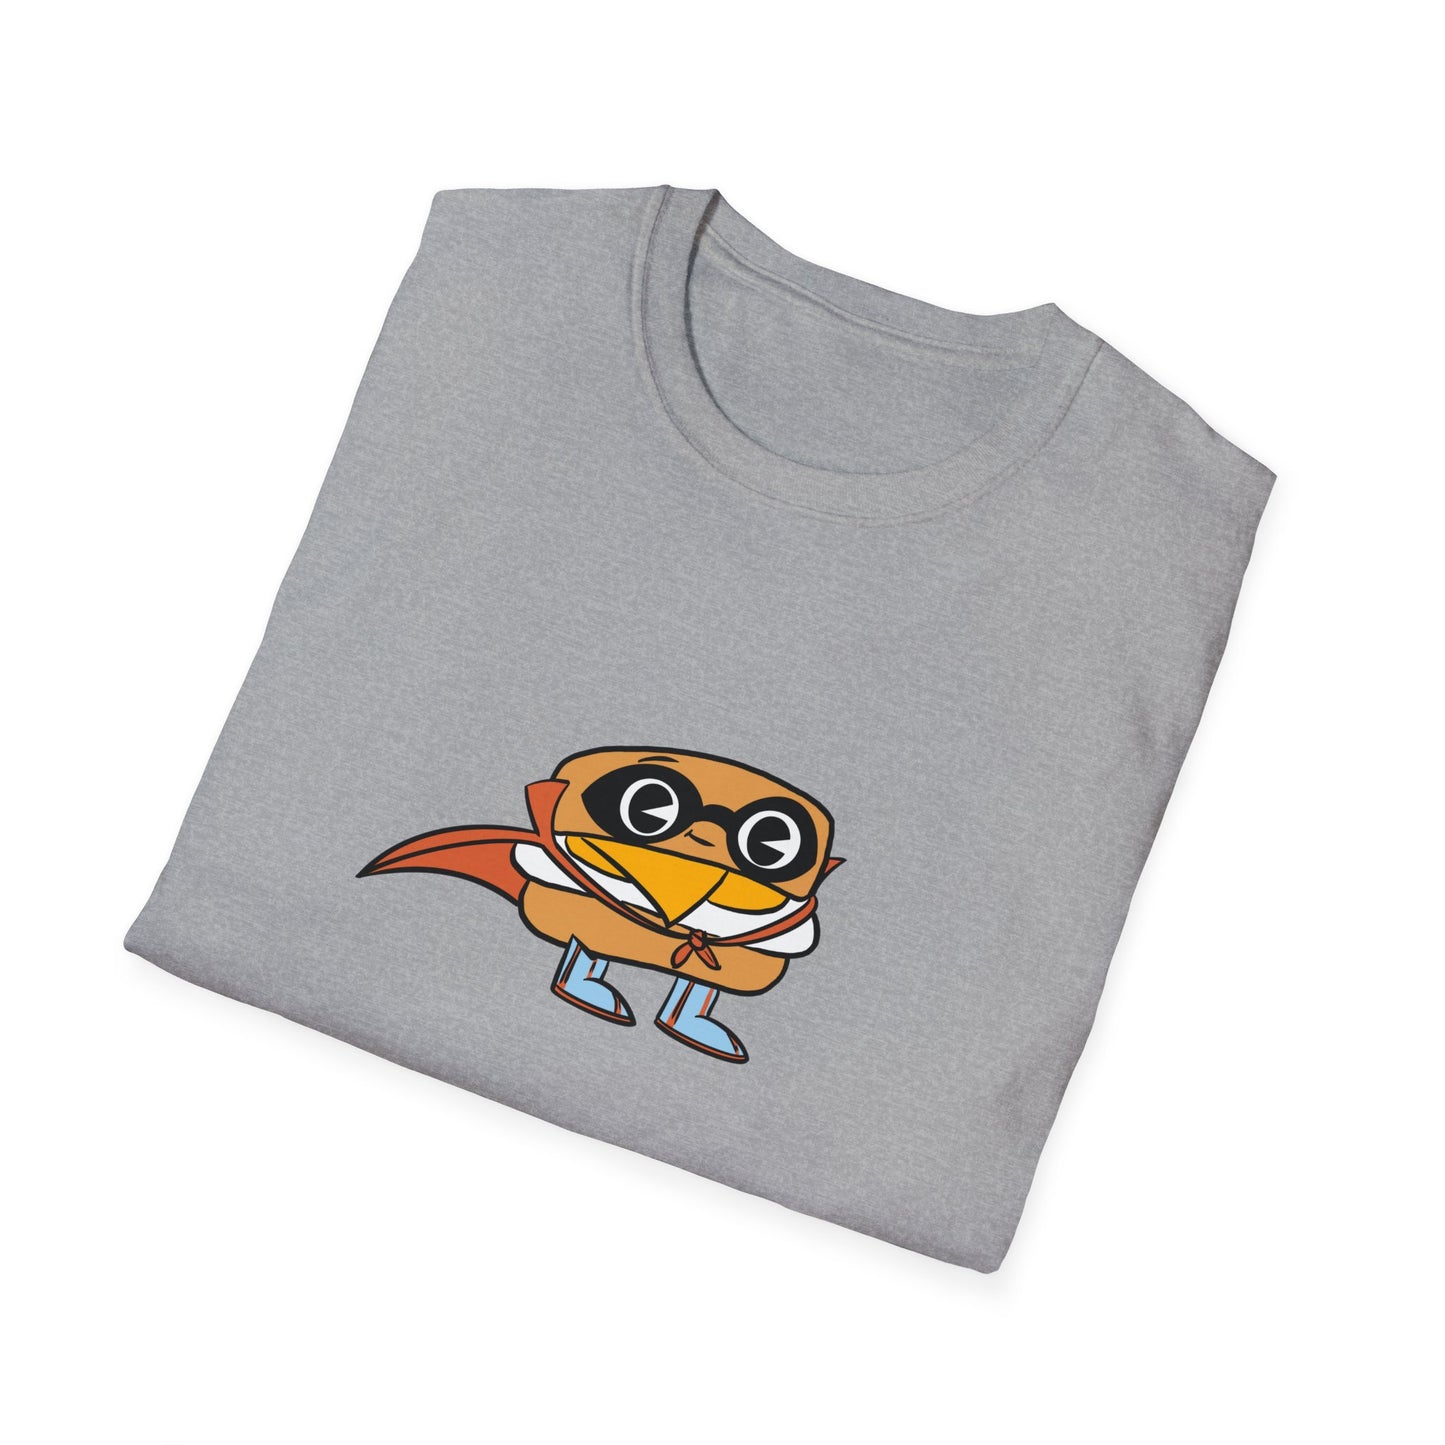 Superhero Biscuit - Unisex Softstyle T-Shirt - Charcoal